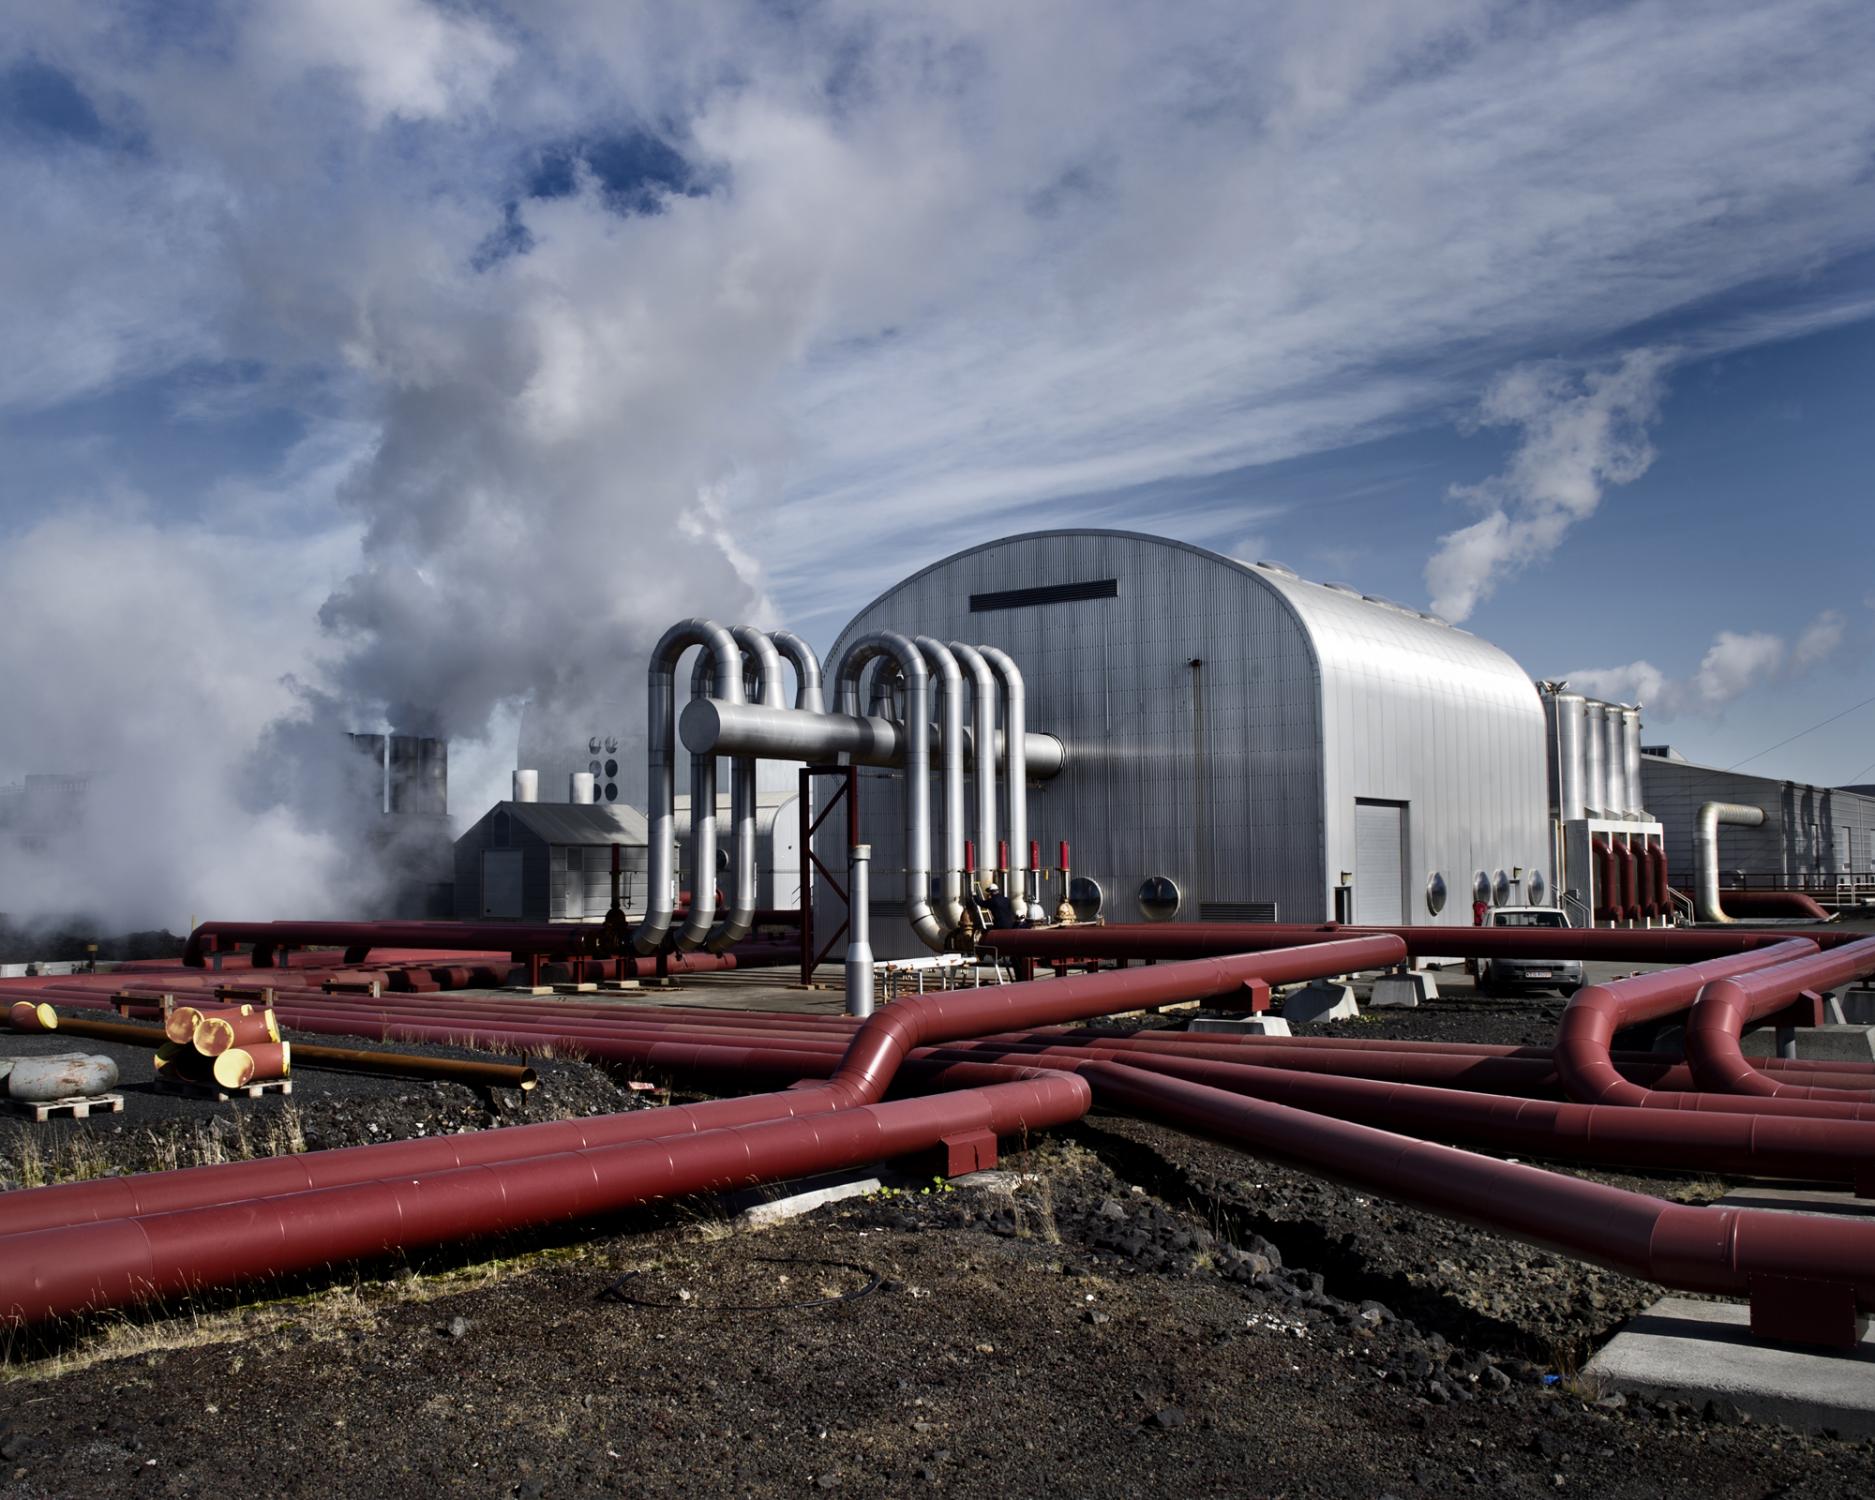 Steamland - Geothermal Power in Iceland.
August 2010.
Iceland,...